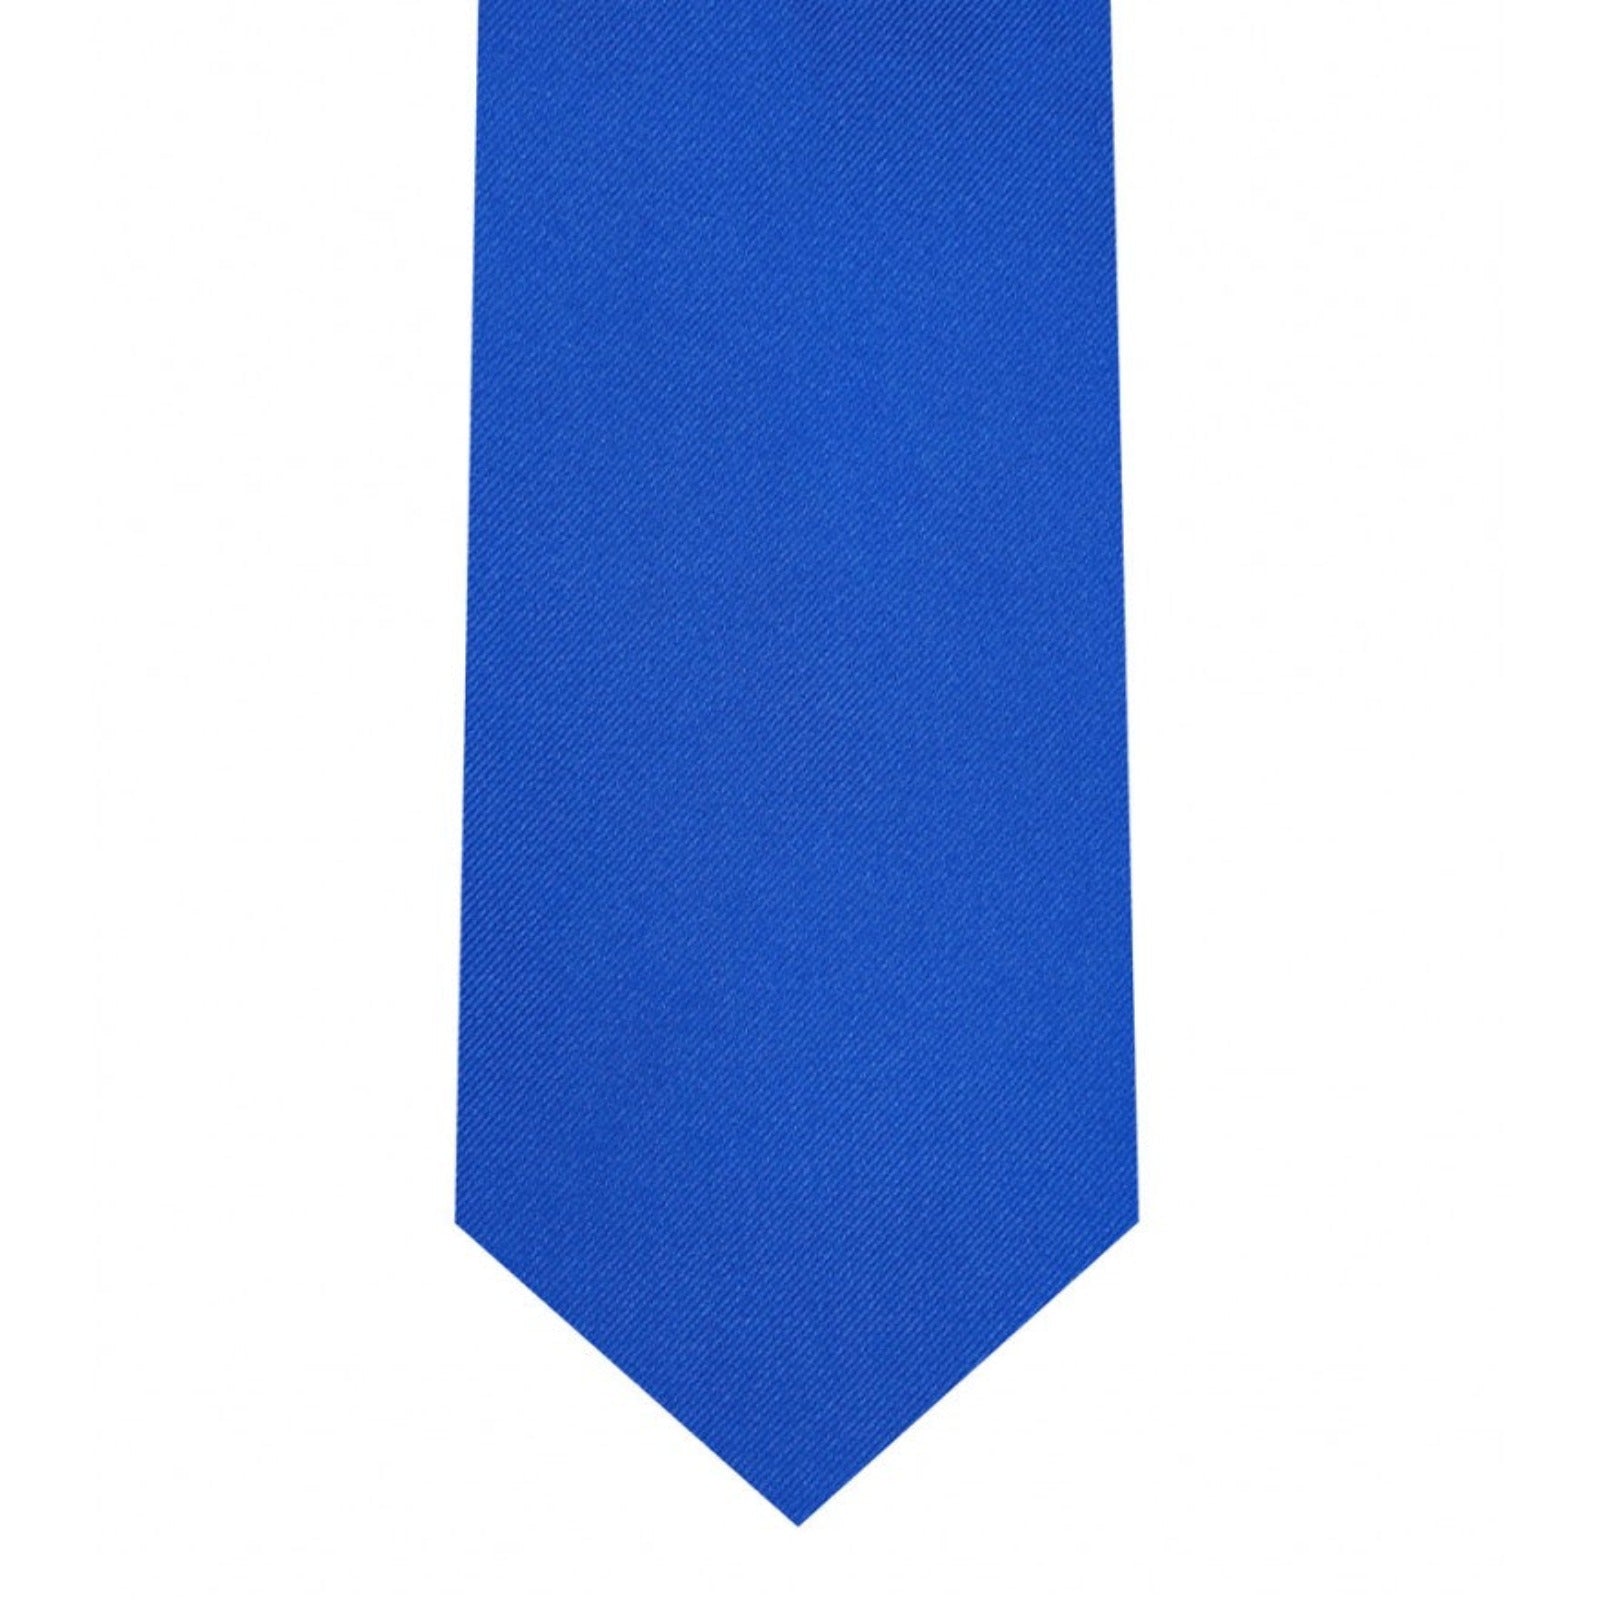 Classic Royal Blue Tie Skinny width 2.75 inches With Matching Pocket Square | KCT Menswear